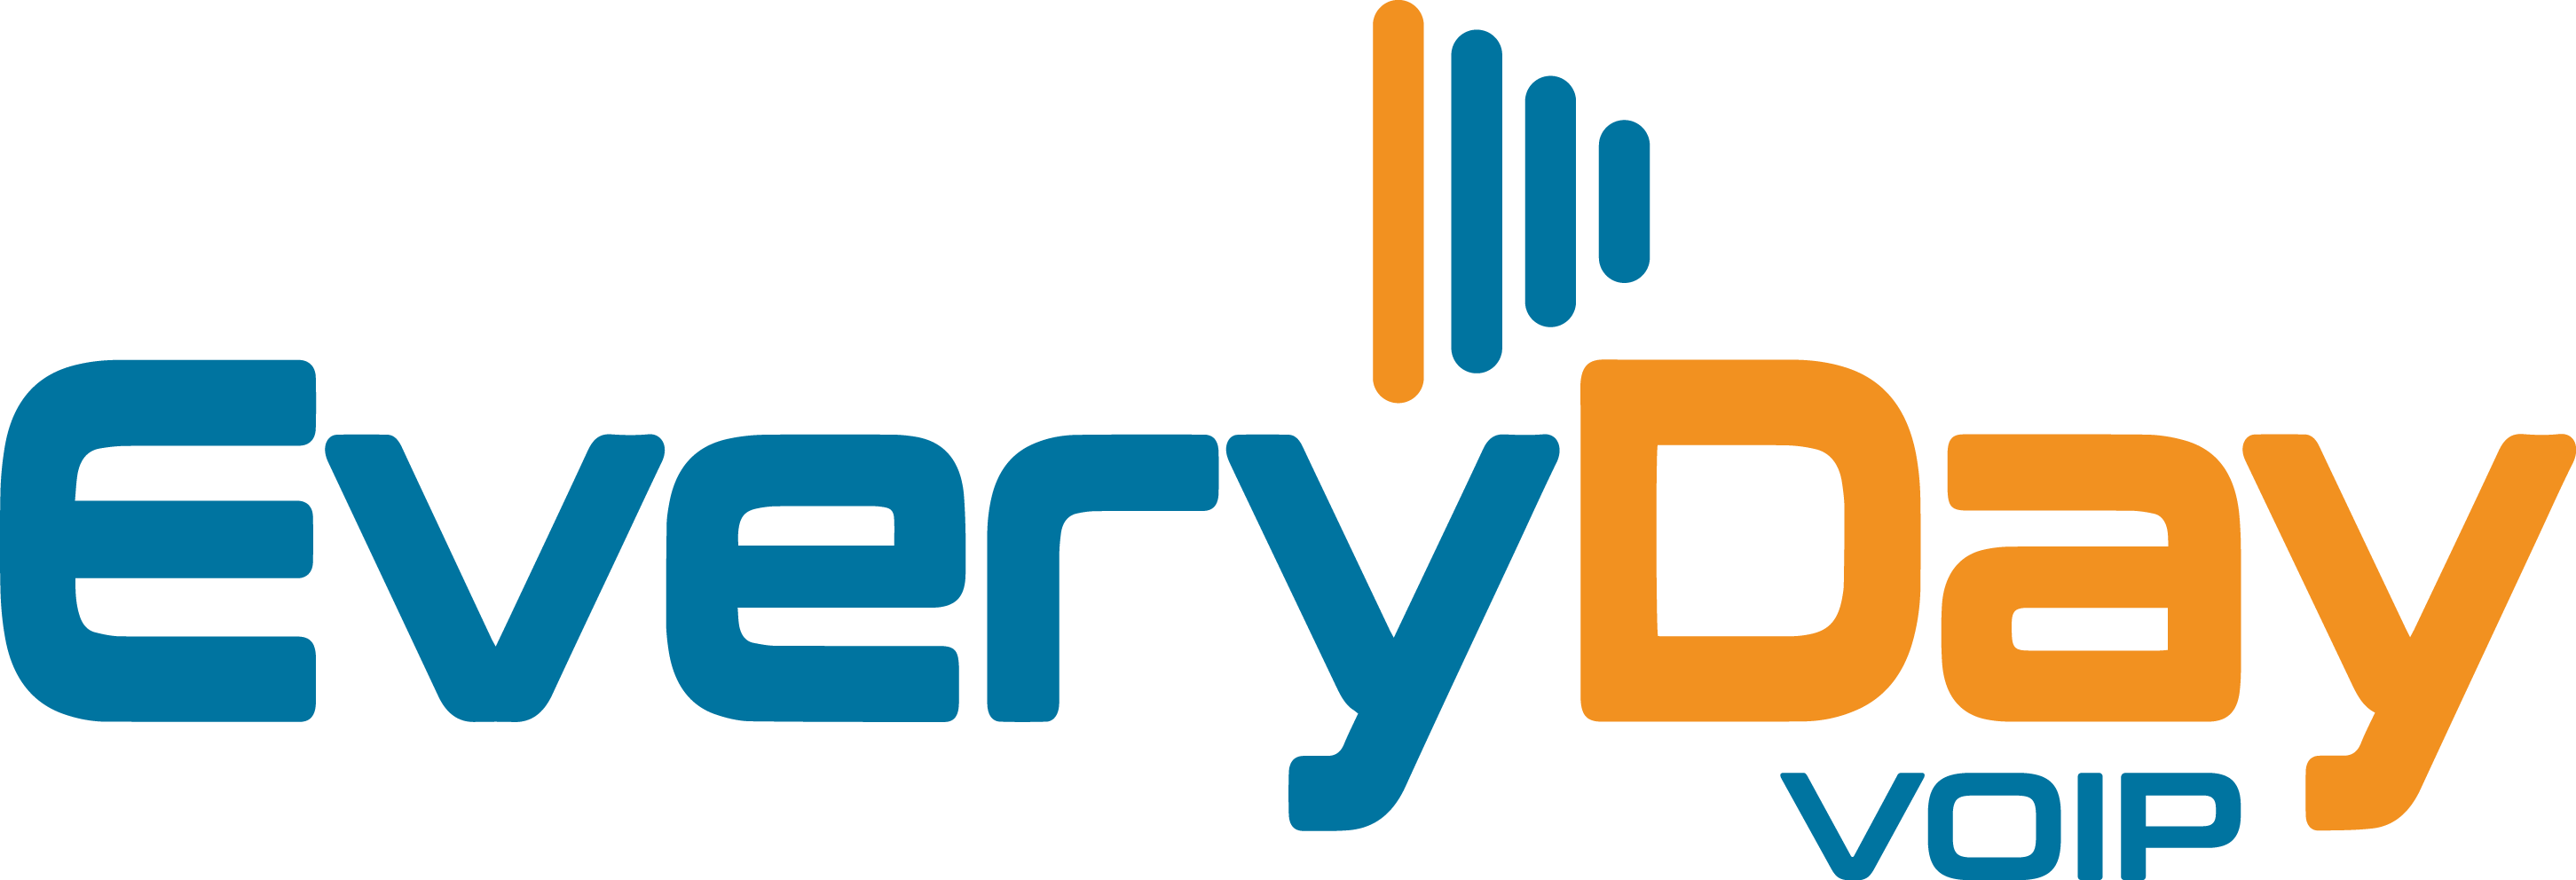 https://www.everydayvoip.uk/wp-content/webpc-passthru.php?src=https://www.everydayvoip.uk/wp-content/uploads/2021/04/EveryDay-logo-FAW-1.png&nocache=1